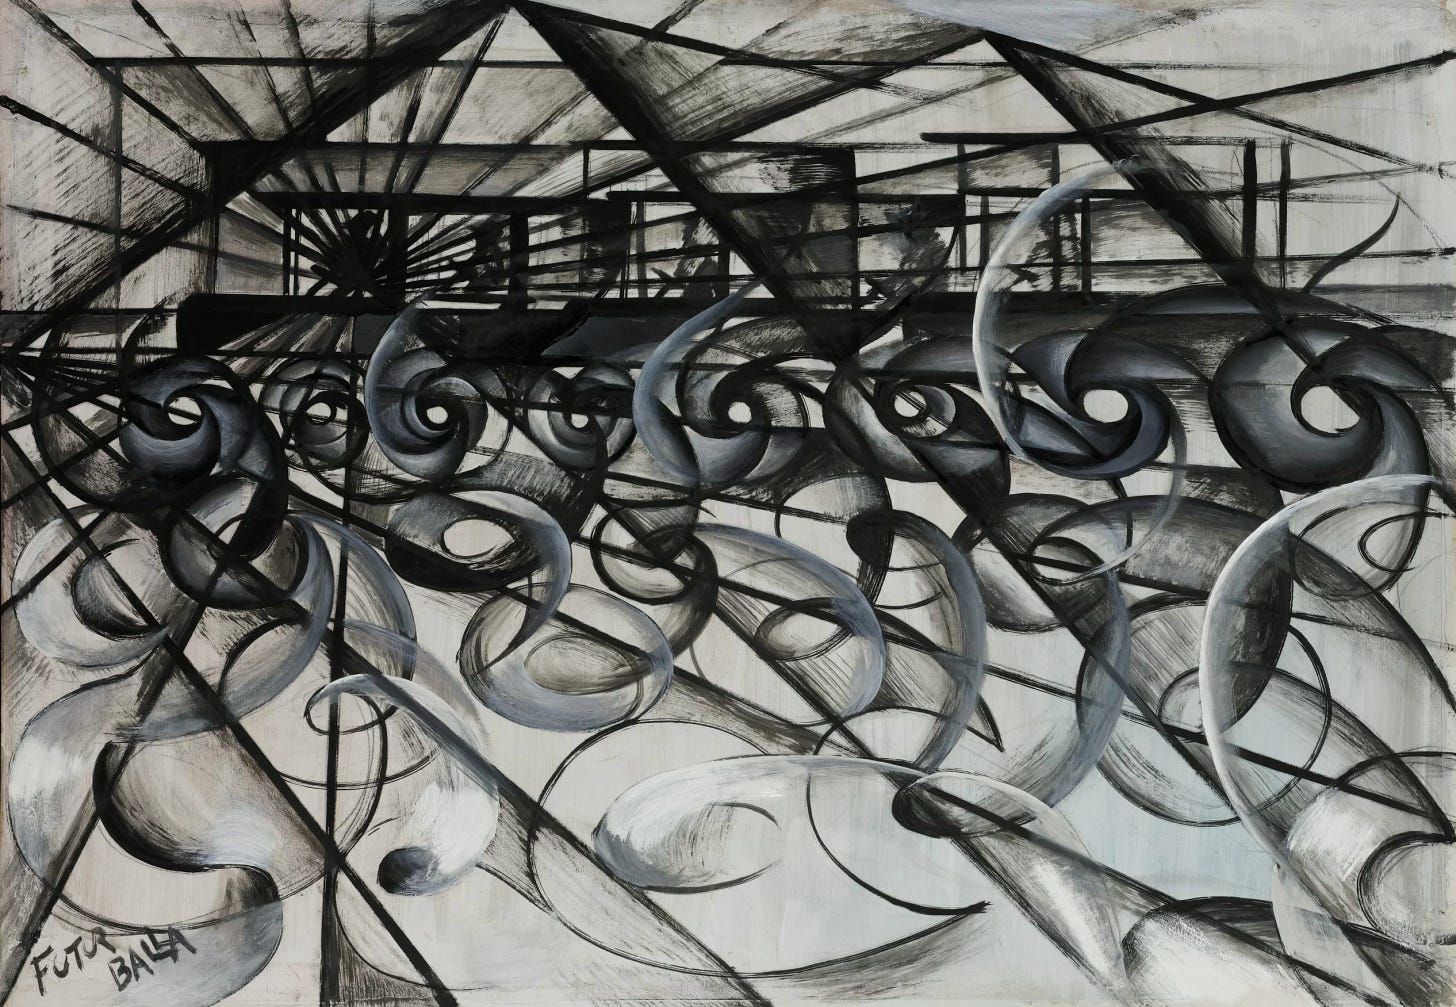 A bunch of swirly lines against a backdrop of straight lines in grey and white